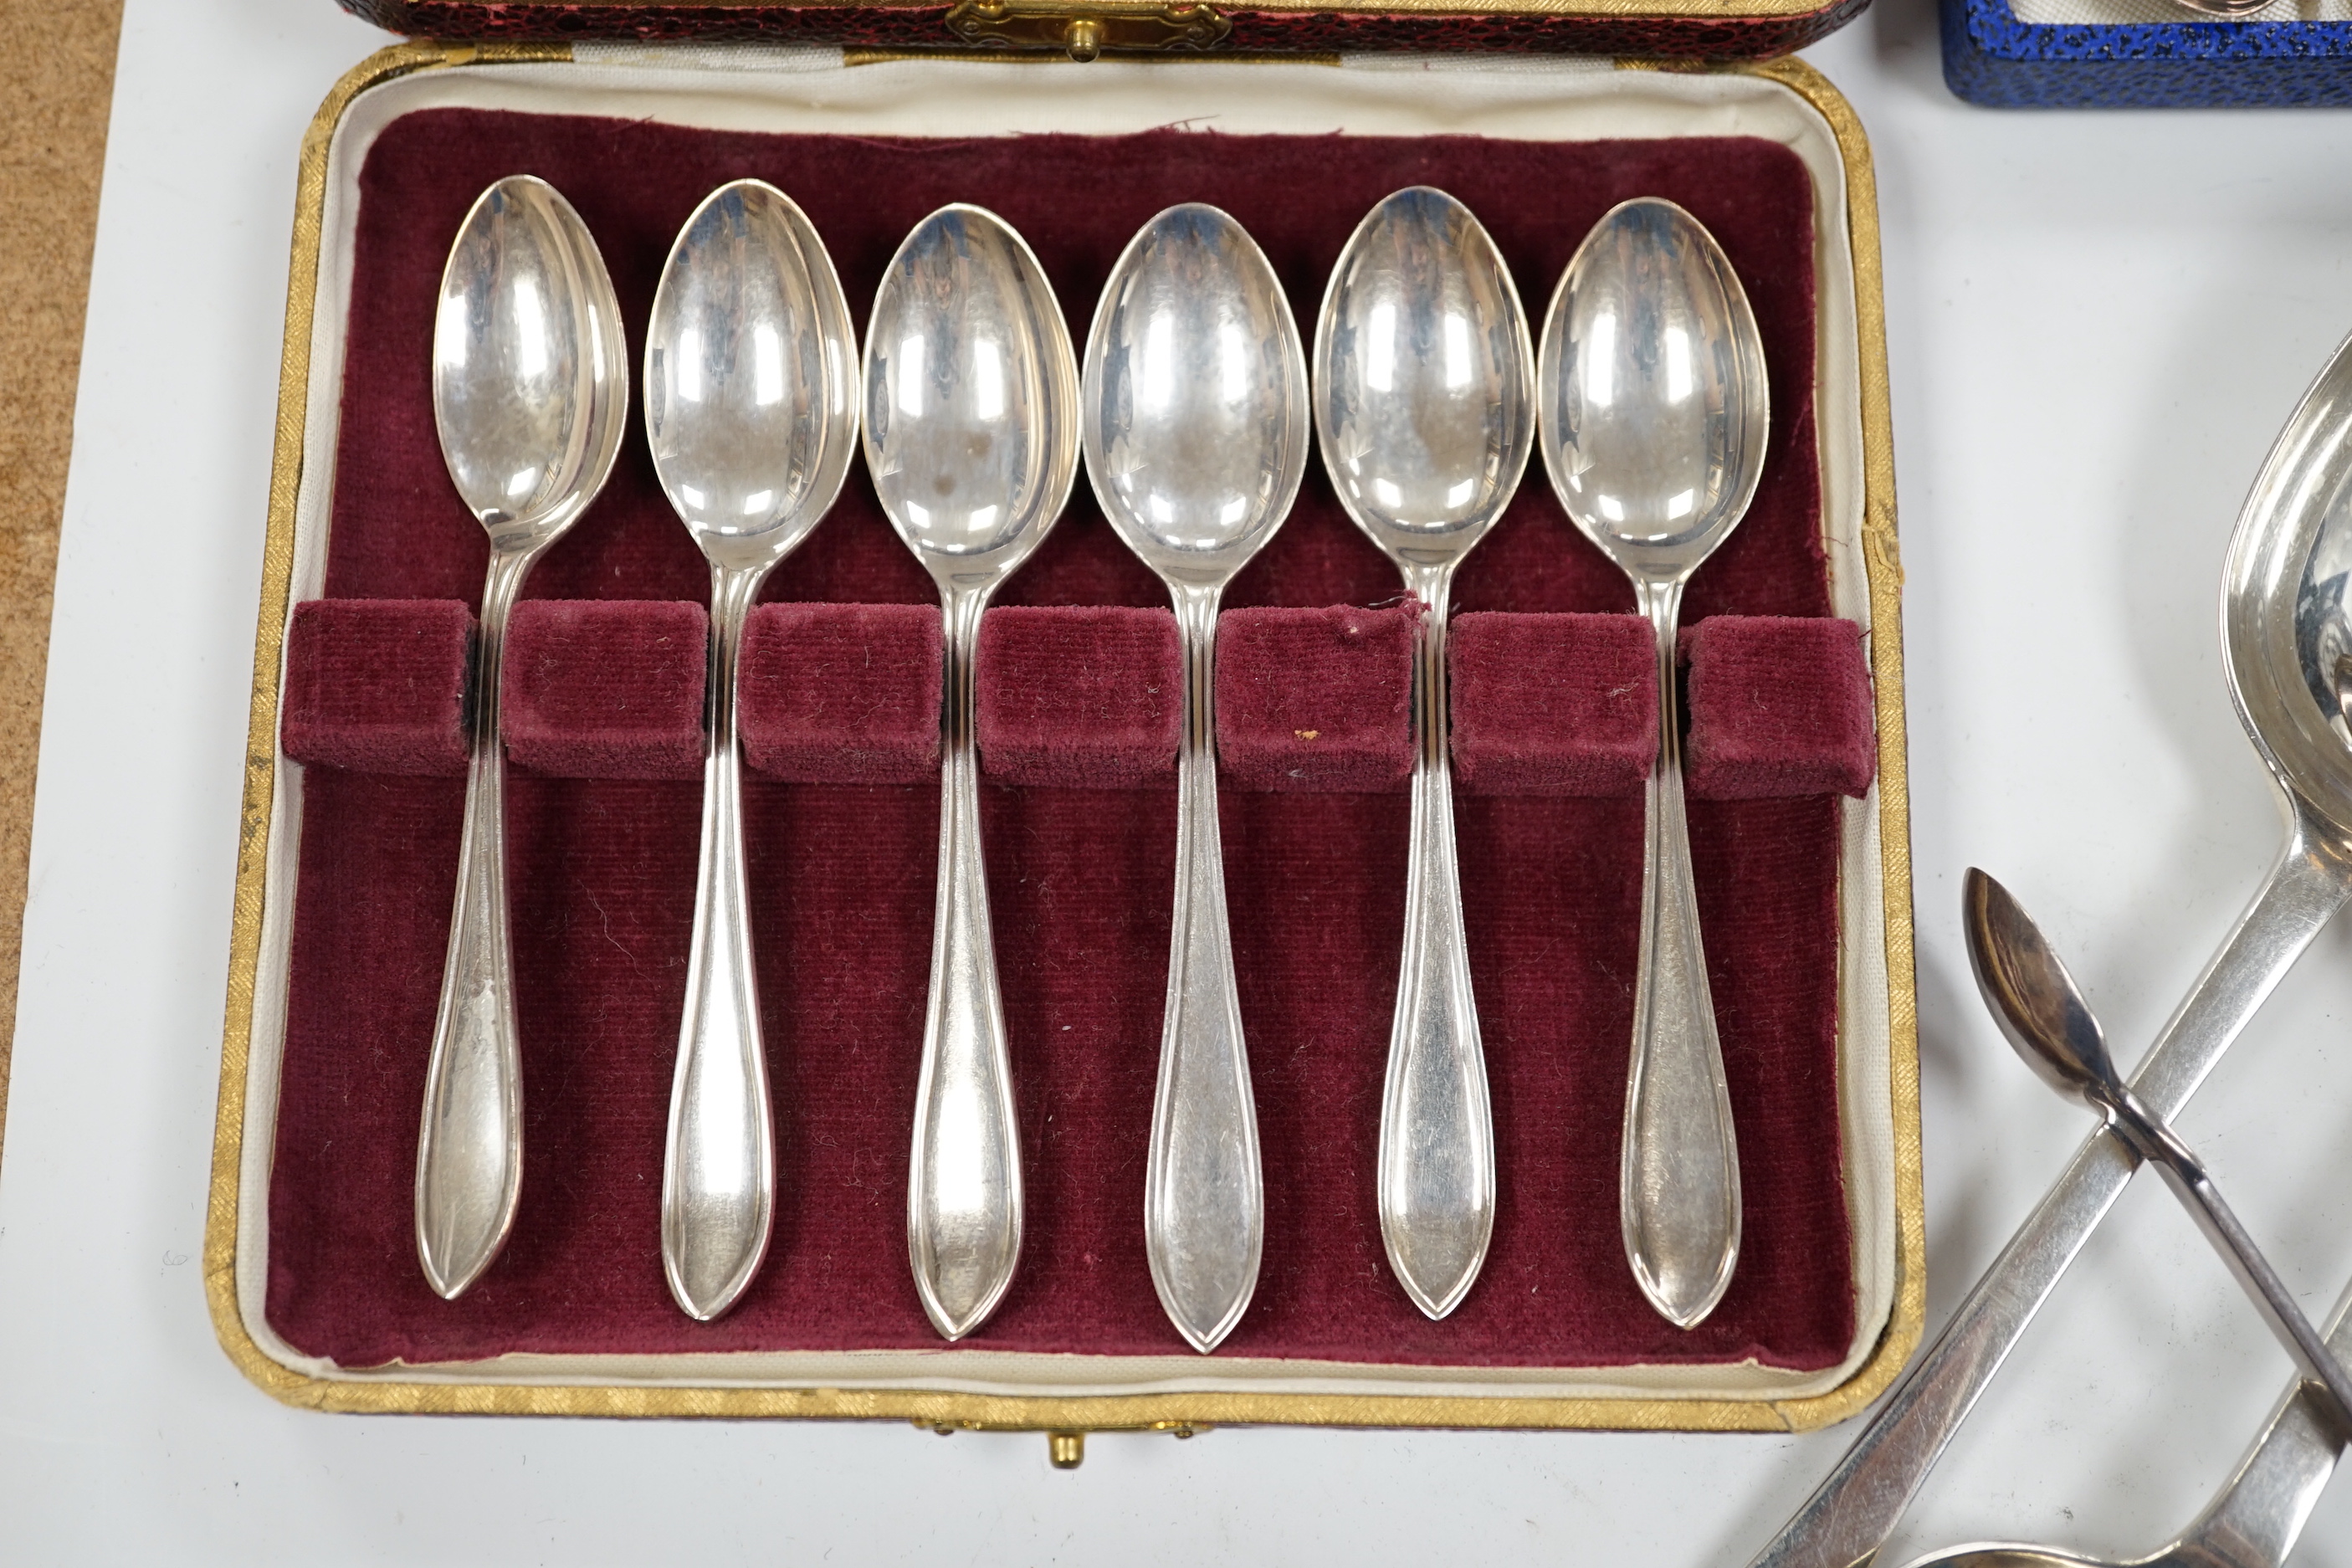 A pair of George V silver rat tail trefid spoons, Goldsmiths & Silversmiths Co Ltd, London, 1911, 20.2cm, three cased sets of silver coffee spoons and other silver flatware